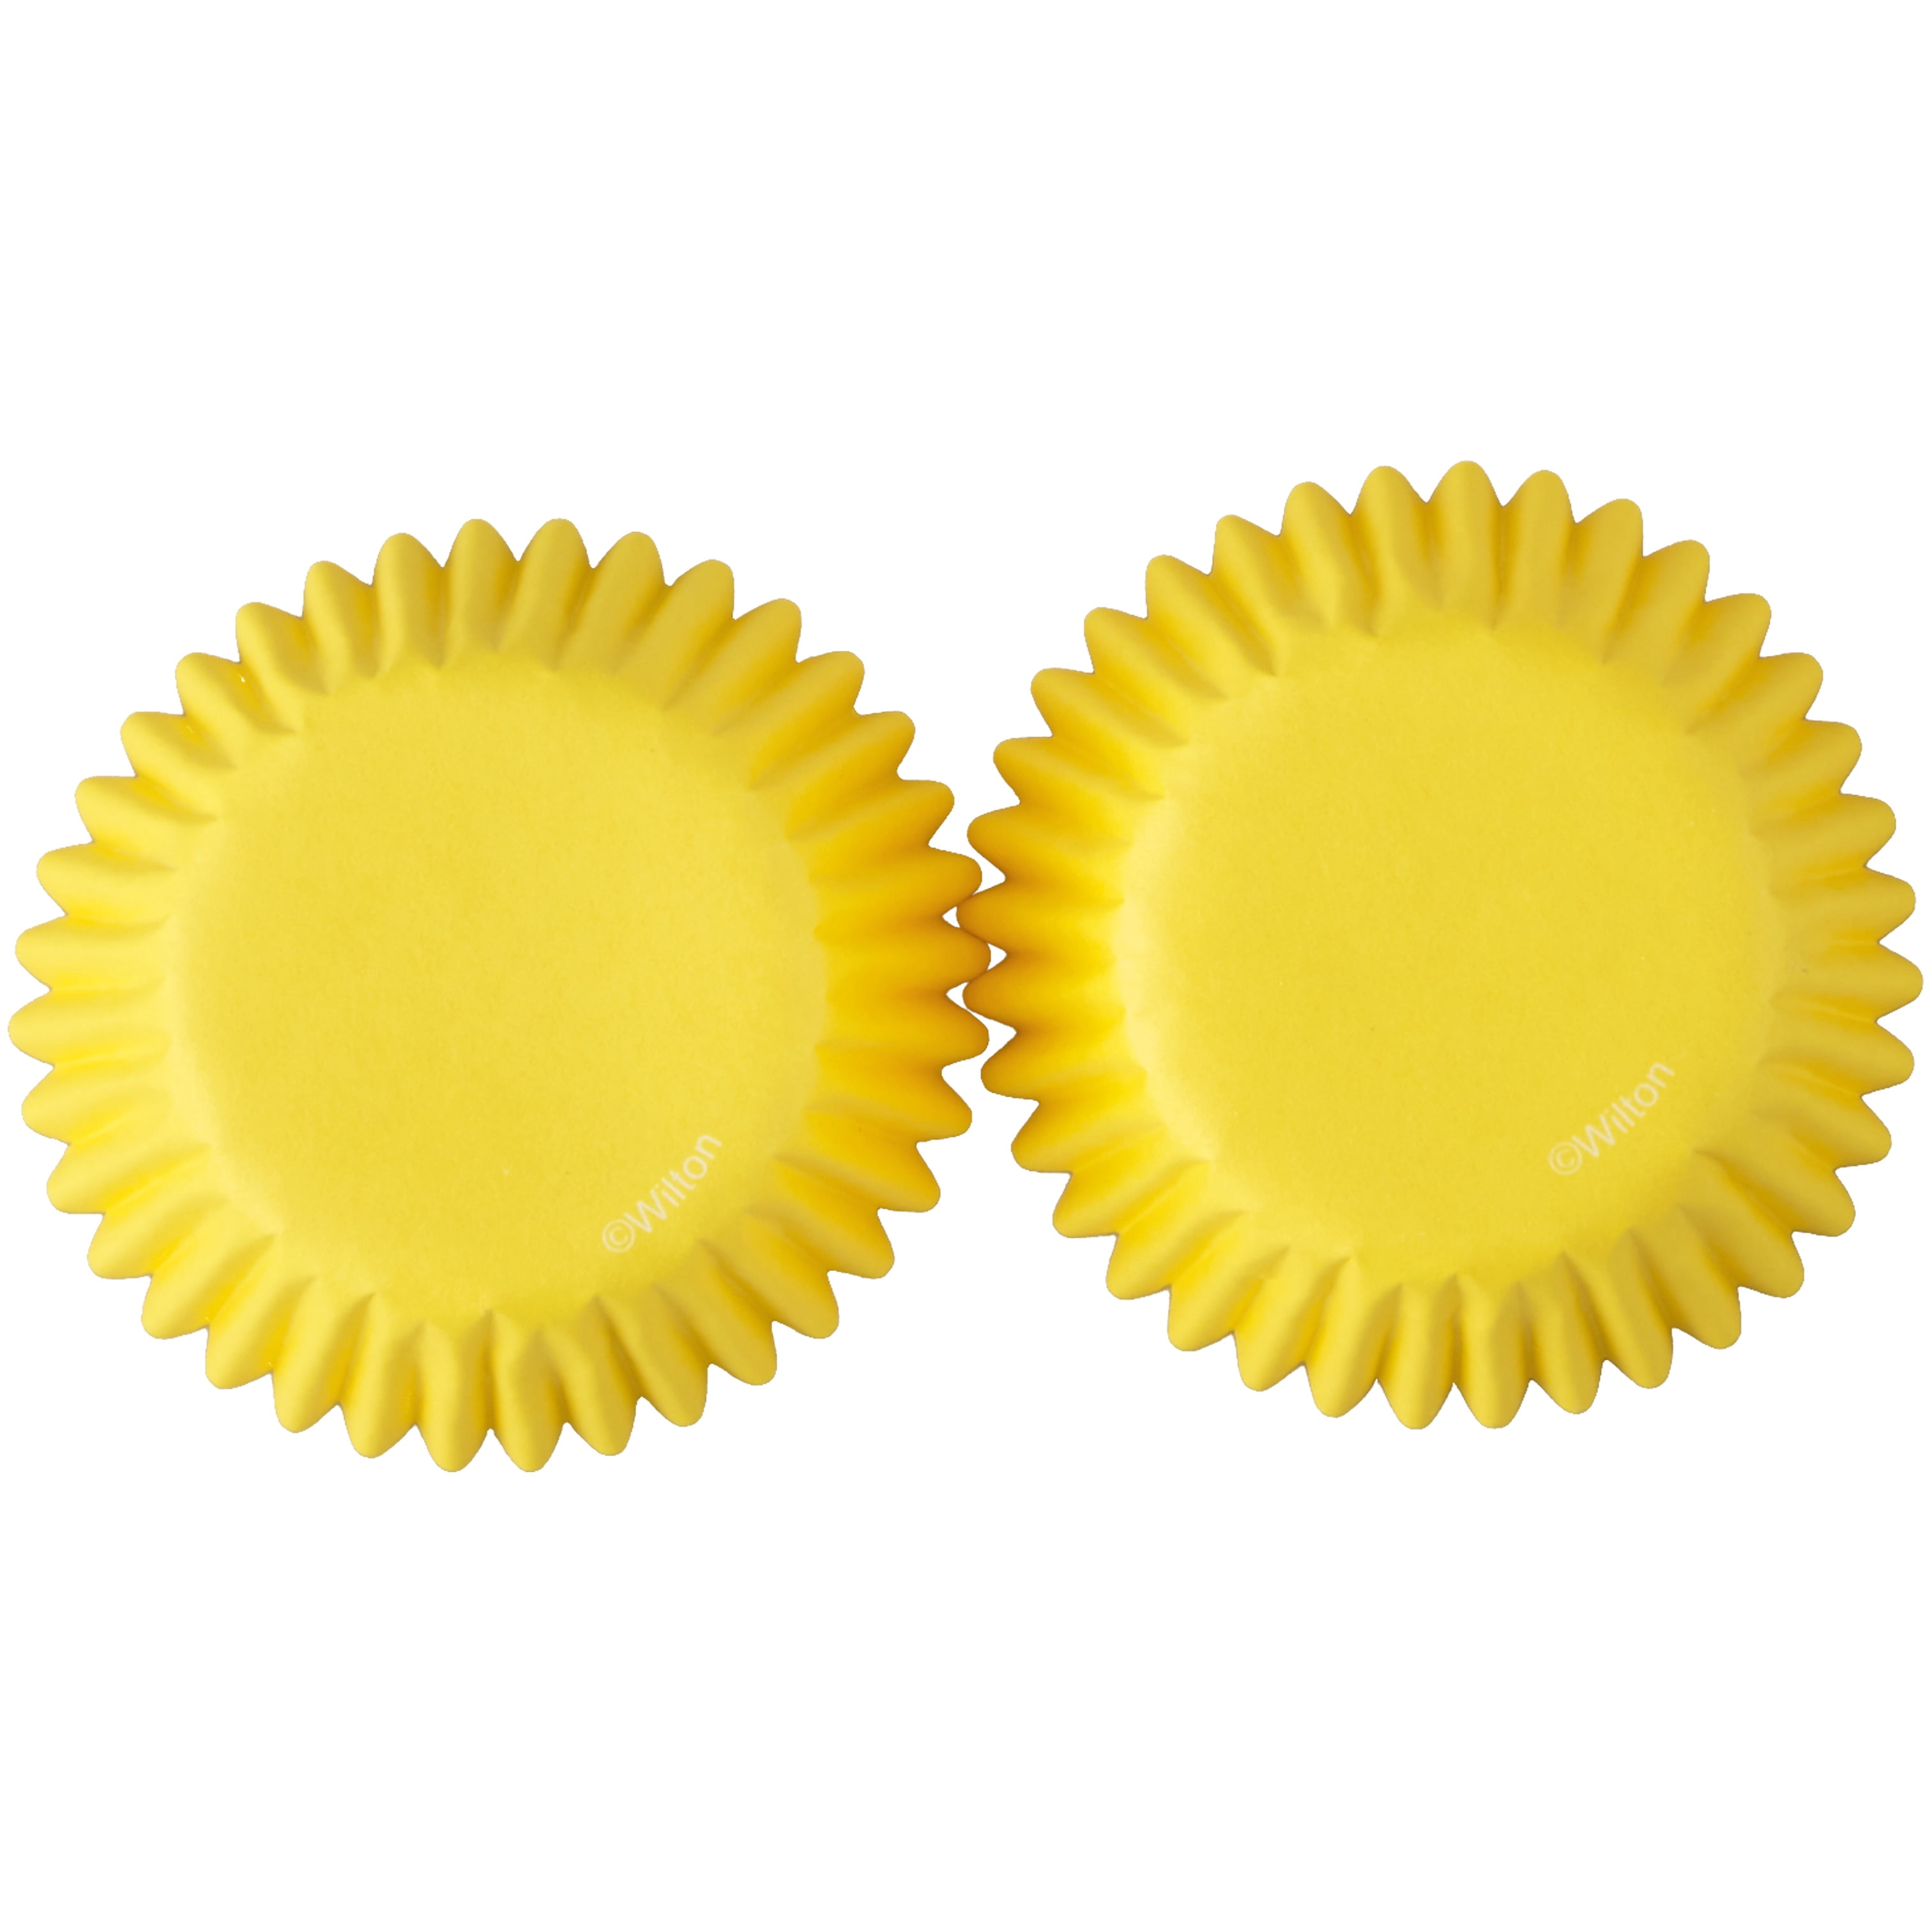 Primary,Red,Yellow,Blue Mini Bake Cups,Cupcake Papers,100 Ct.,Wilton.School